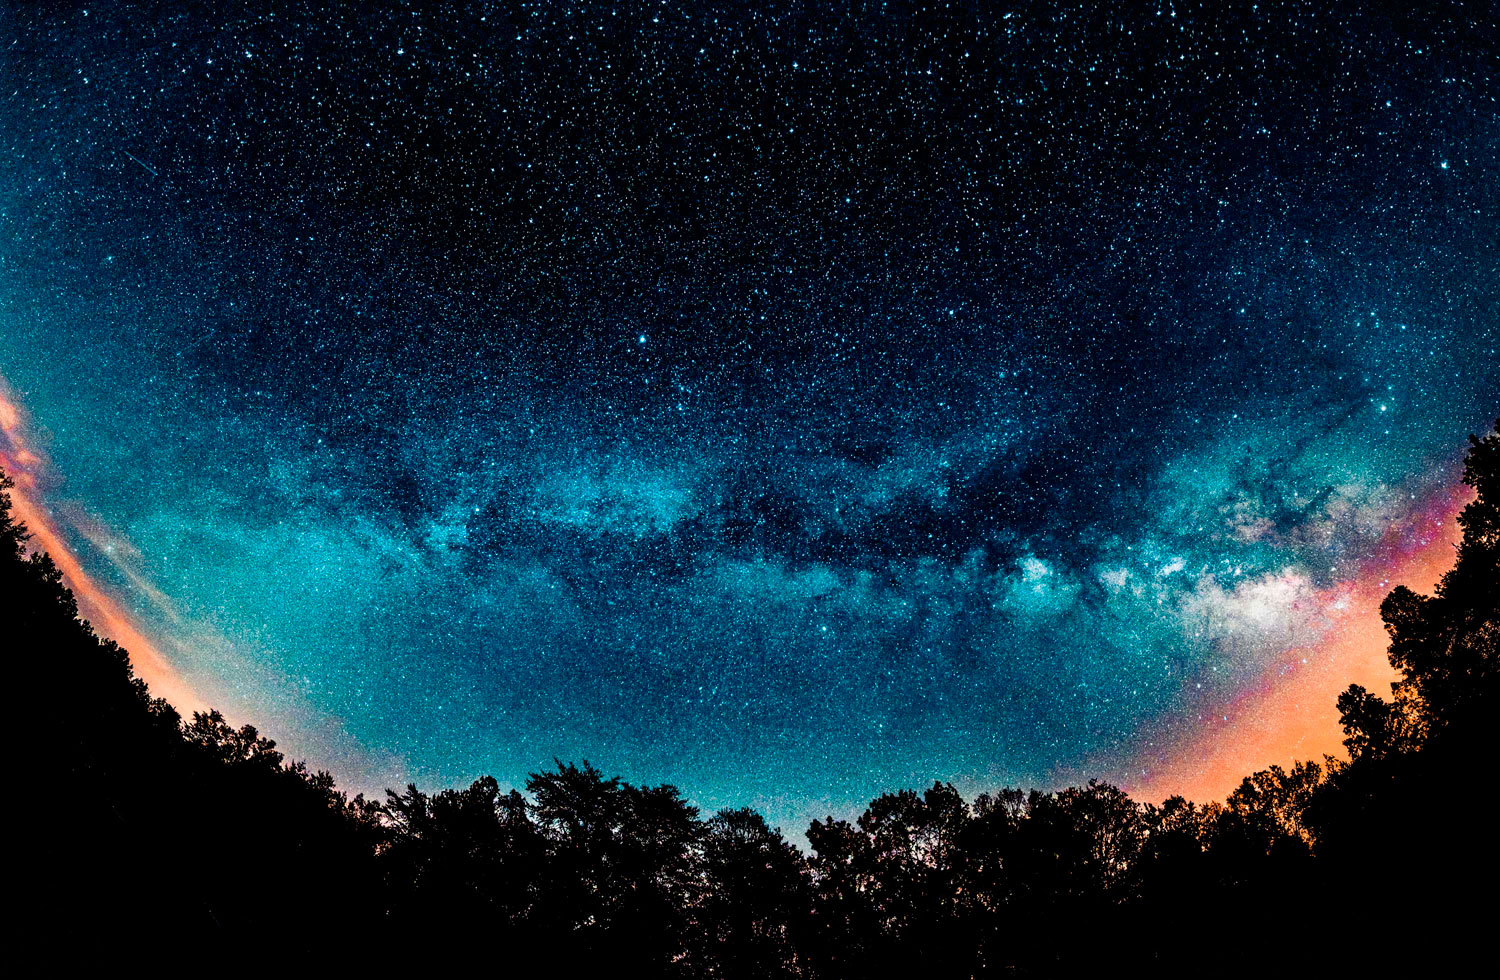 A panorama of the Milky Way taken from Fall Creek Falls State Park during the Eta Aquarid meteor shower on May 4, 2014.